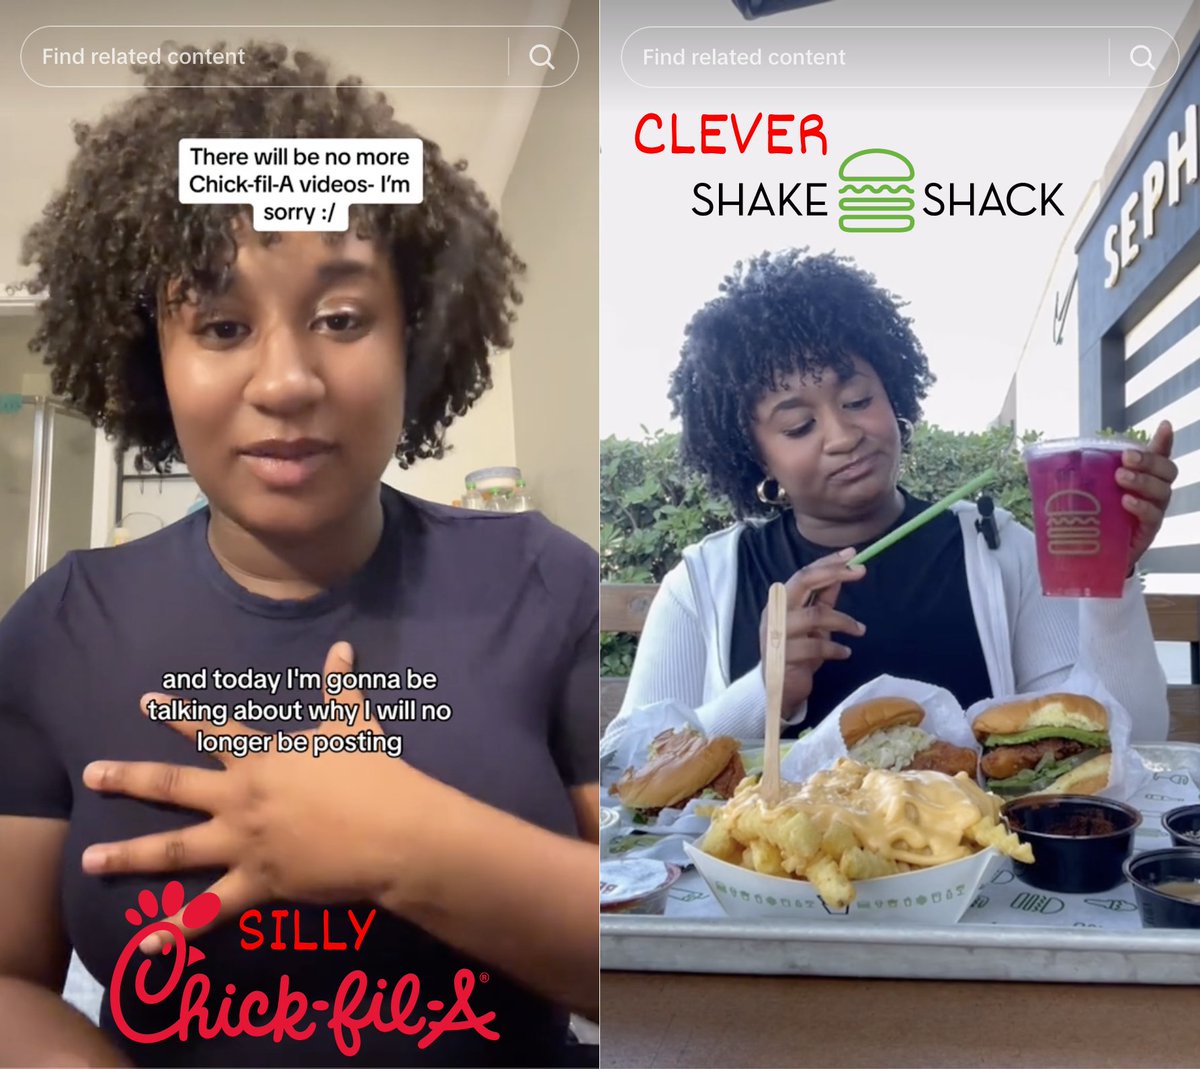 Miri, a Chick-Fil-A employee shares videos of her free meals at the fast-food chain, on Tik Tok. The videos get very popular! But watch how Chick-Fil-A PR team reacted and what happened after that! This is employee advocacy blunder 101. But why did Chick-Fil-A react that way?…